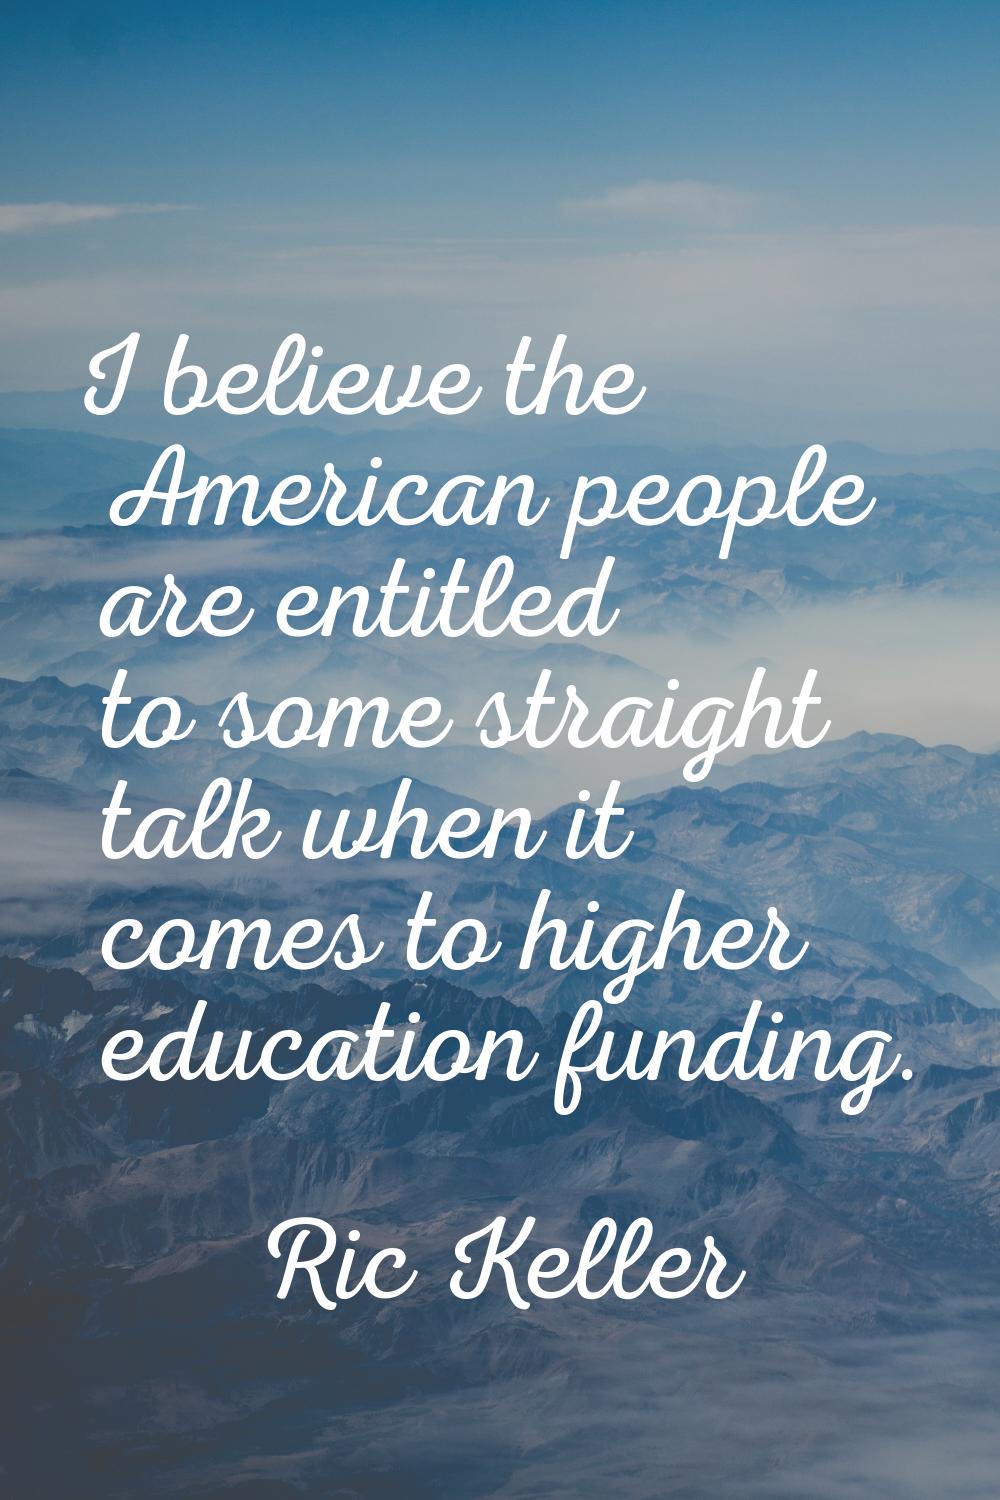 I believe the American people are entitled to some straight talk when it comes to higher education 